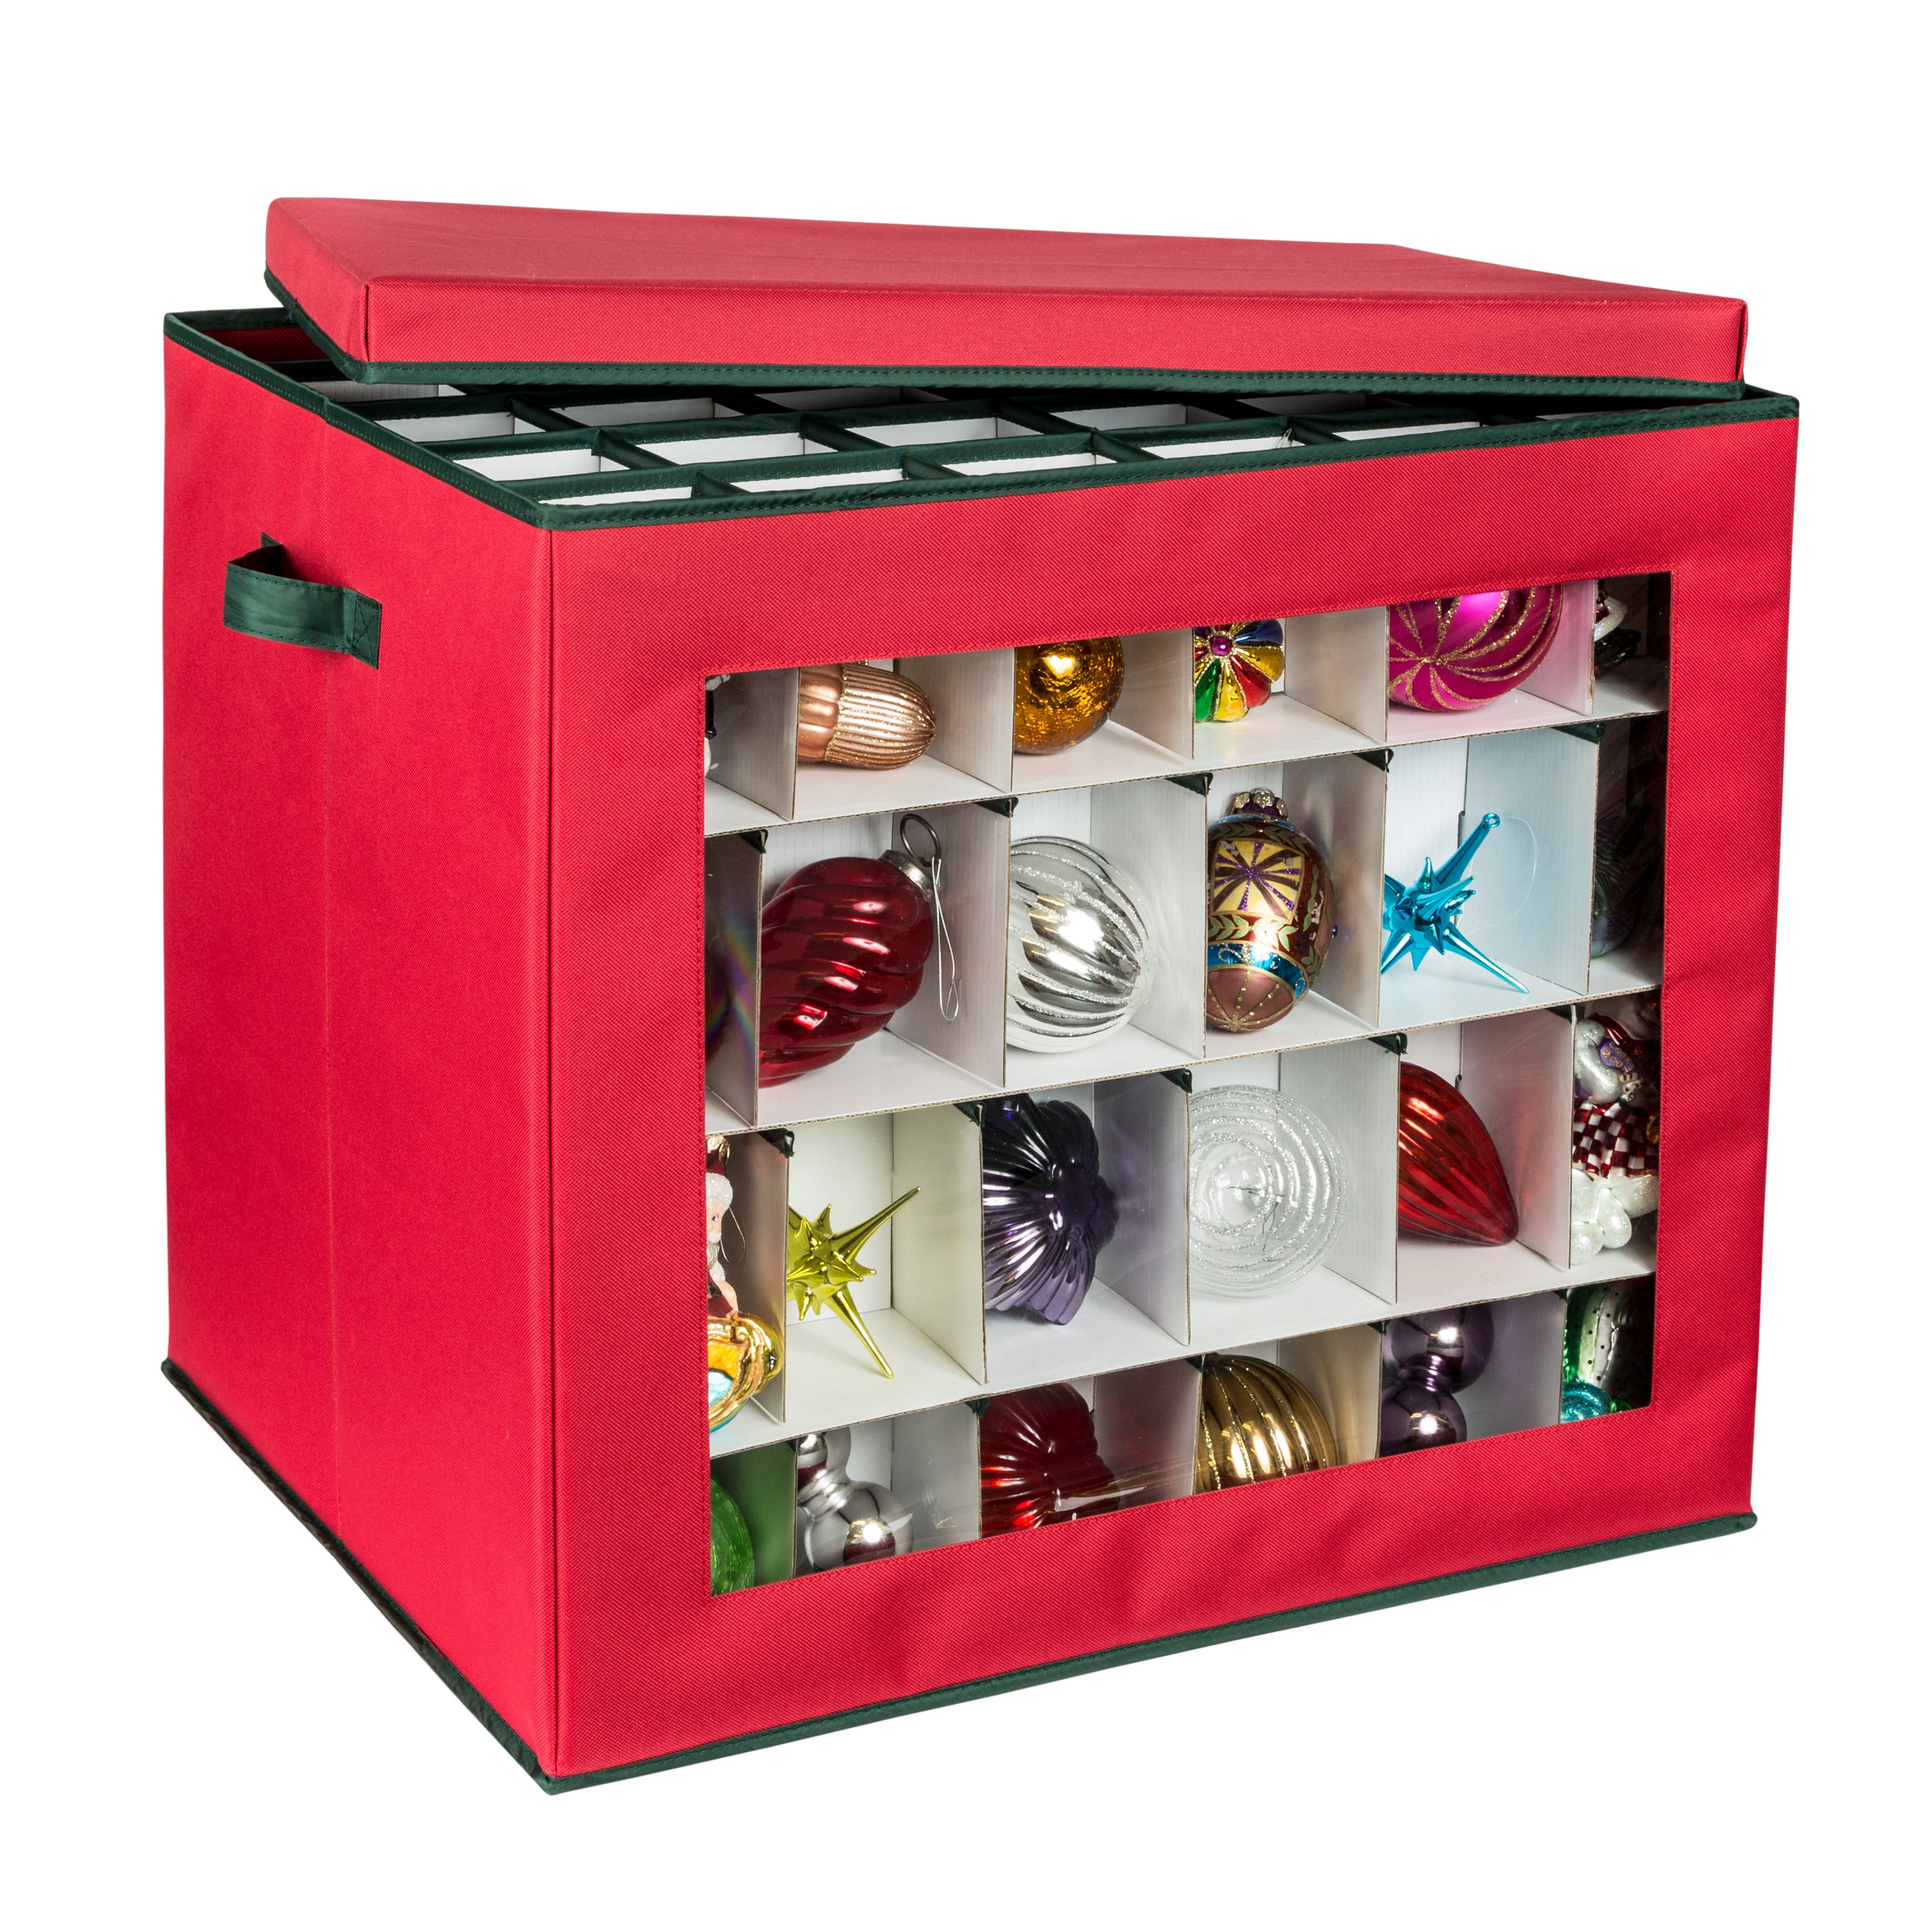 Buy St. Nick's Choice Ornament Storage Container 52 Ornaments, Red